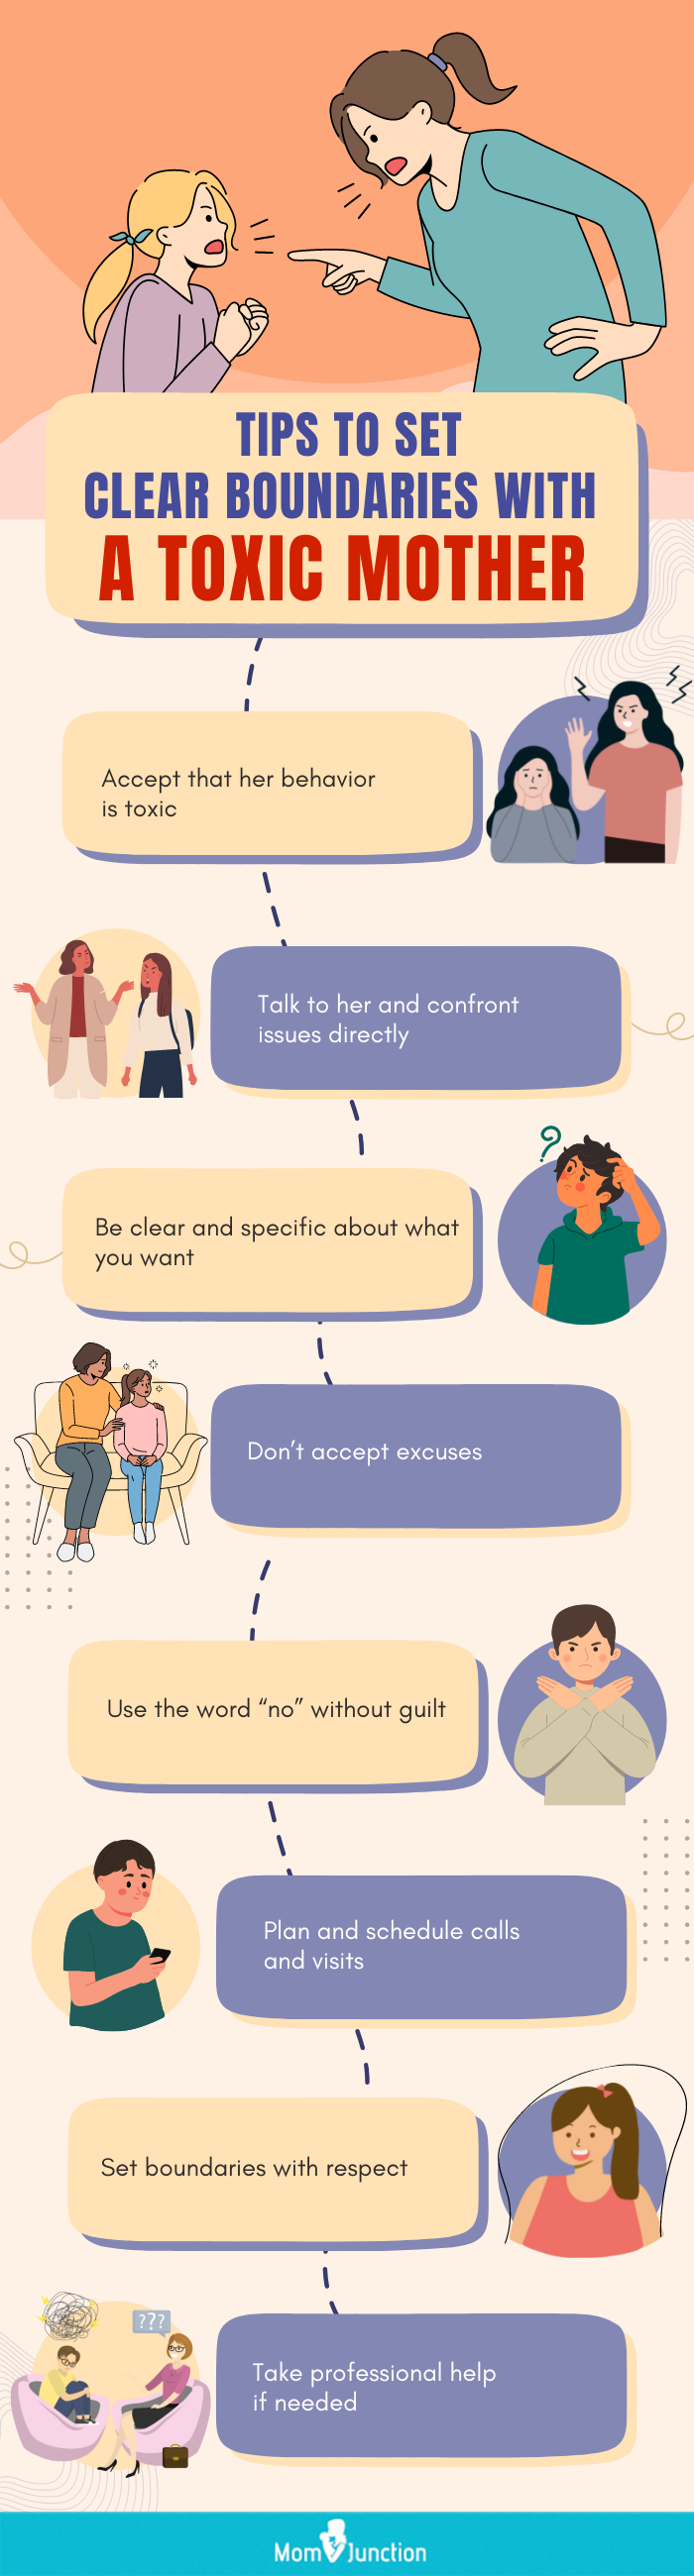 tips to set clear boundaries with a toxic mother [infographic]